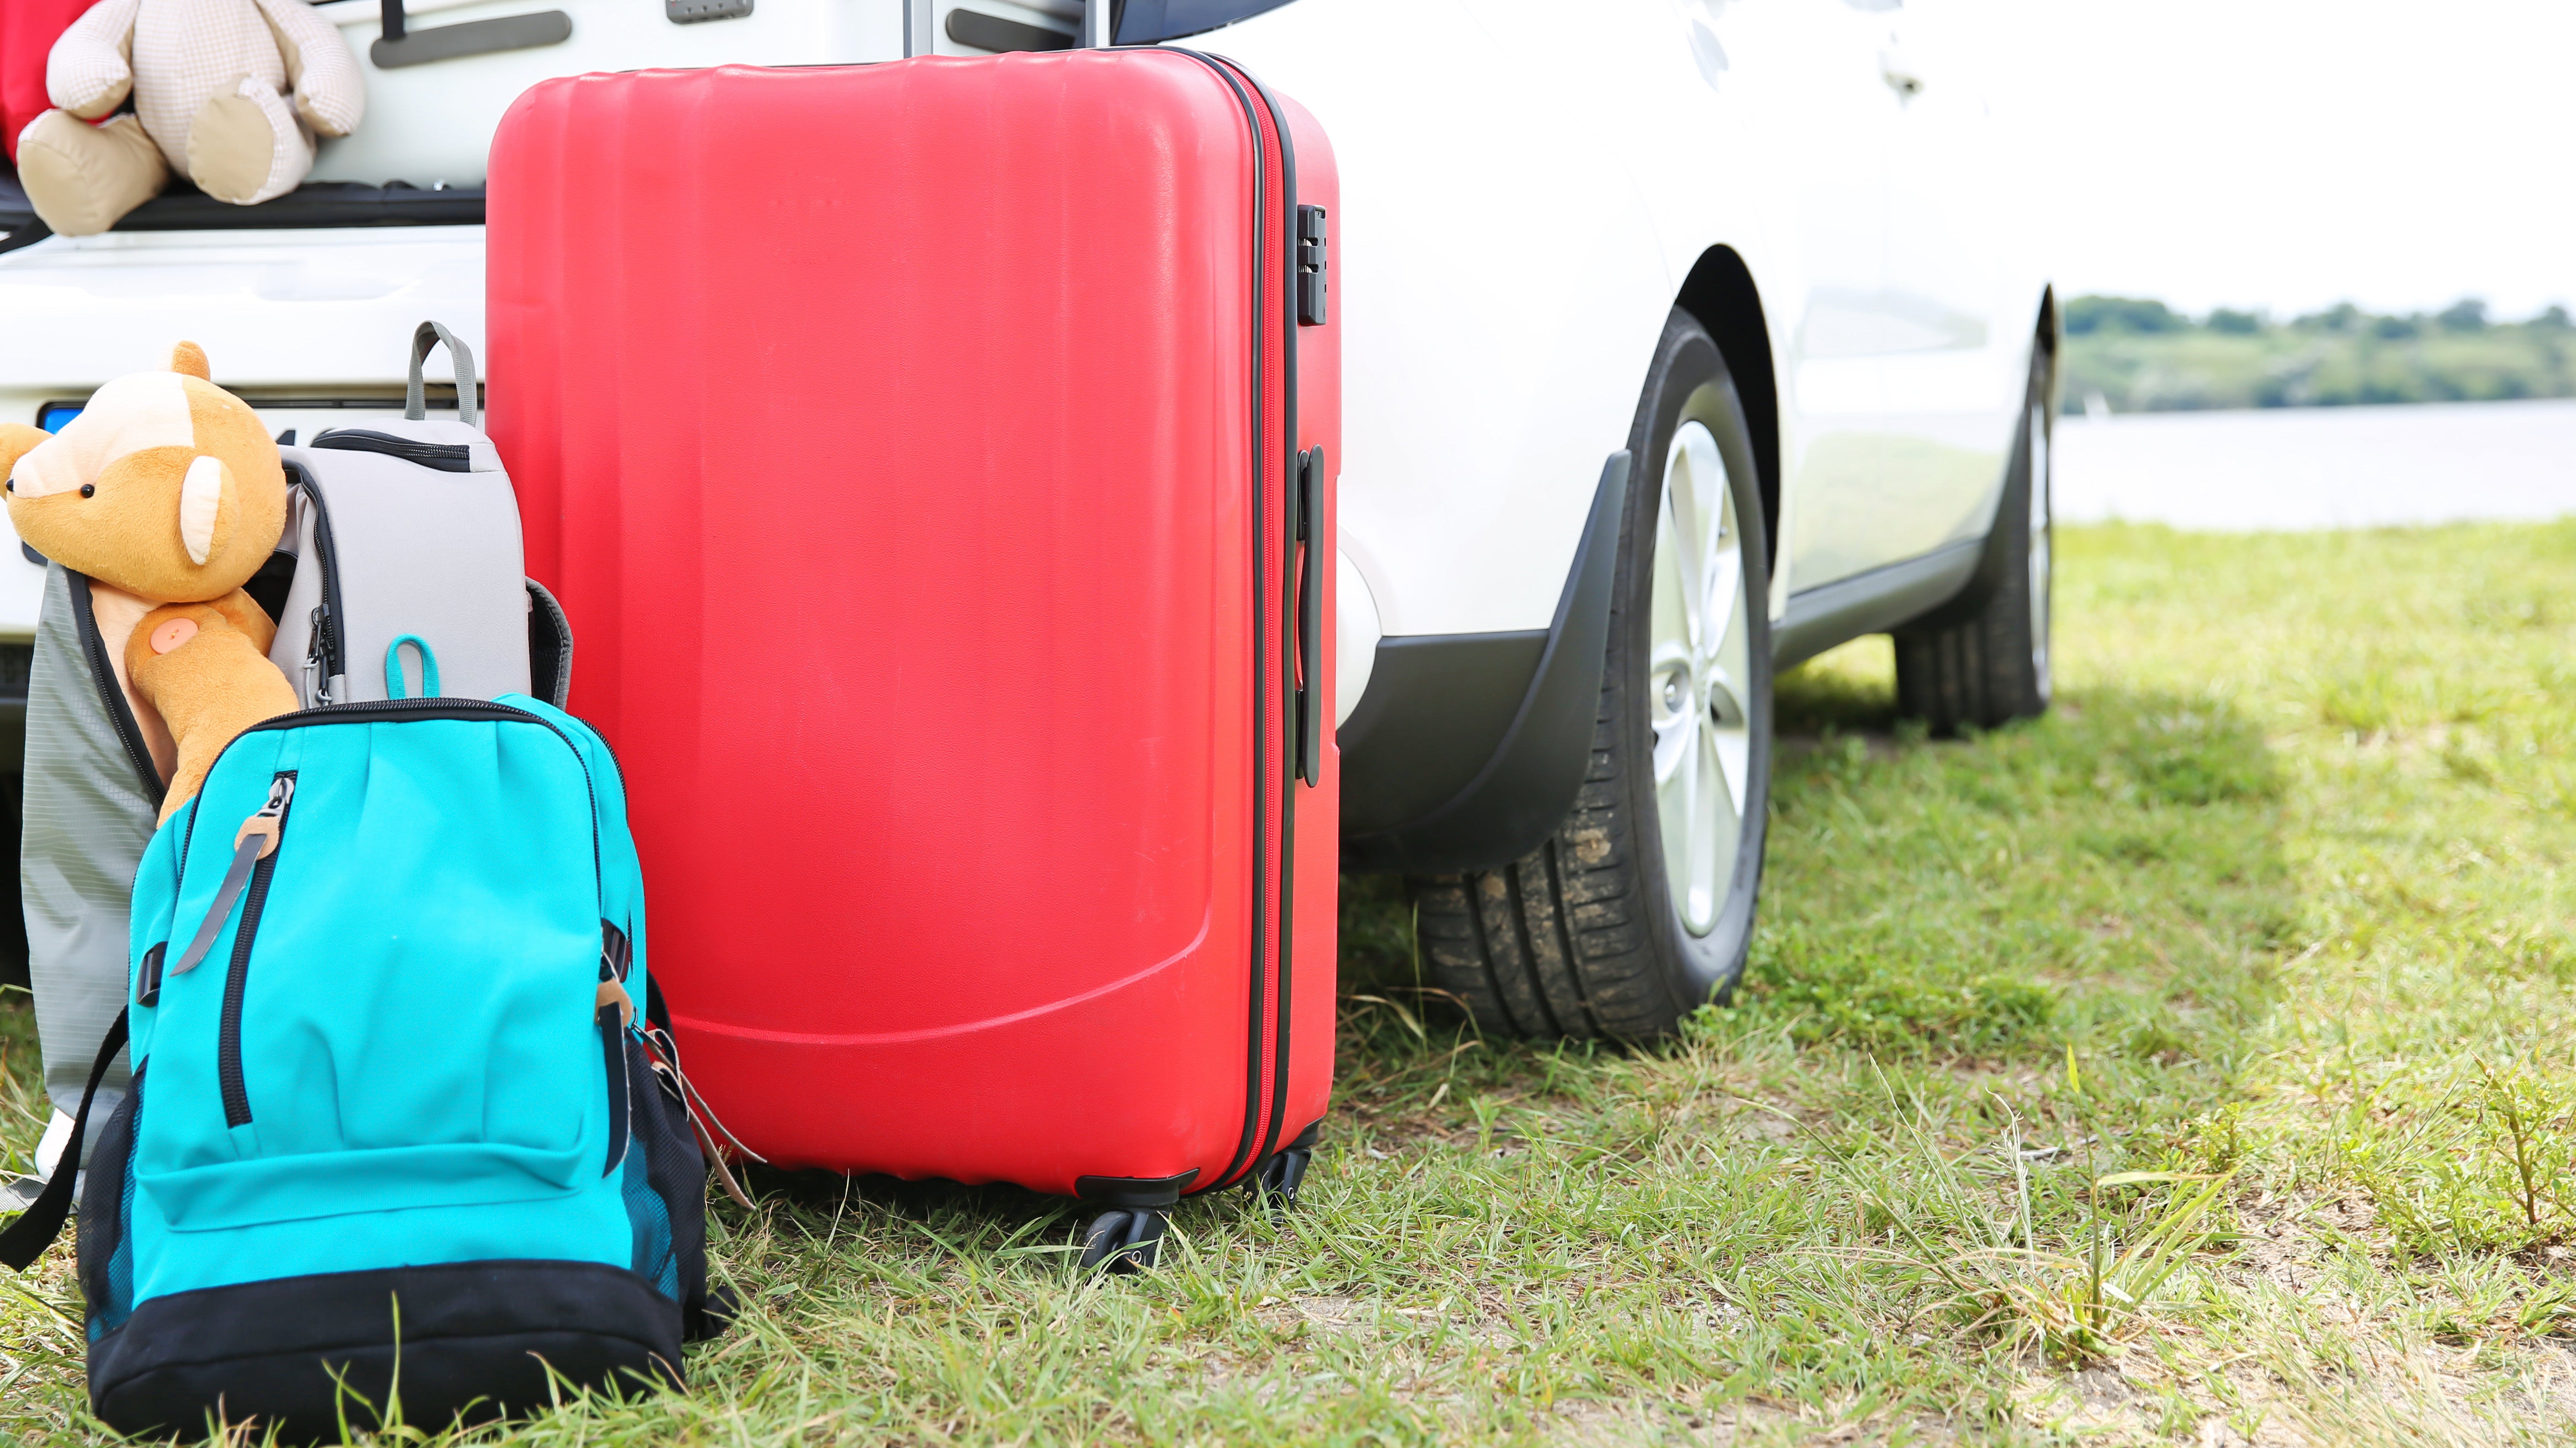 Keep Kids Busy On Your Next Road Trip With ‘Backpack Time’